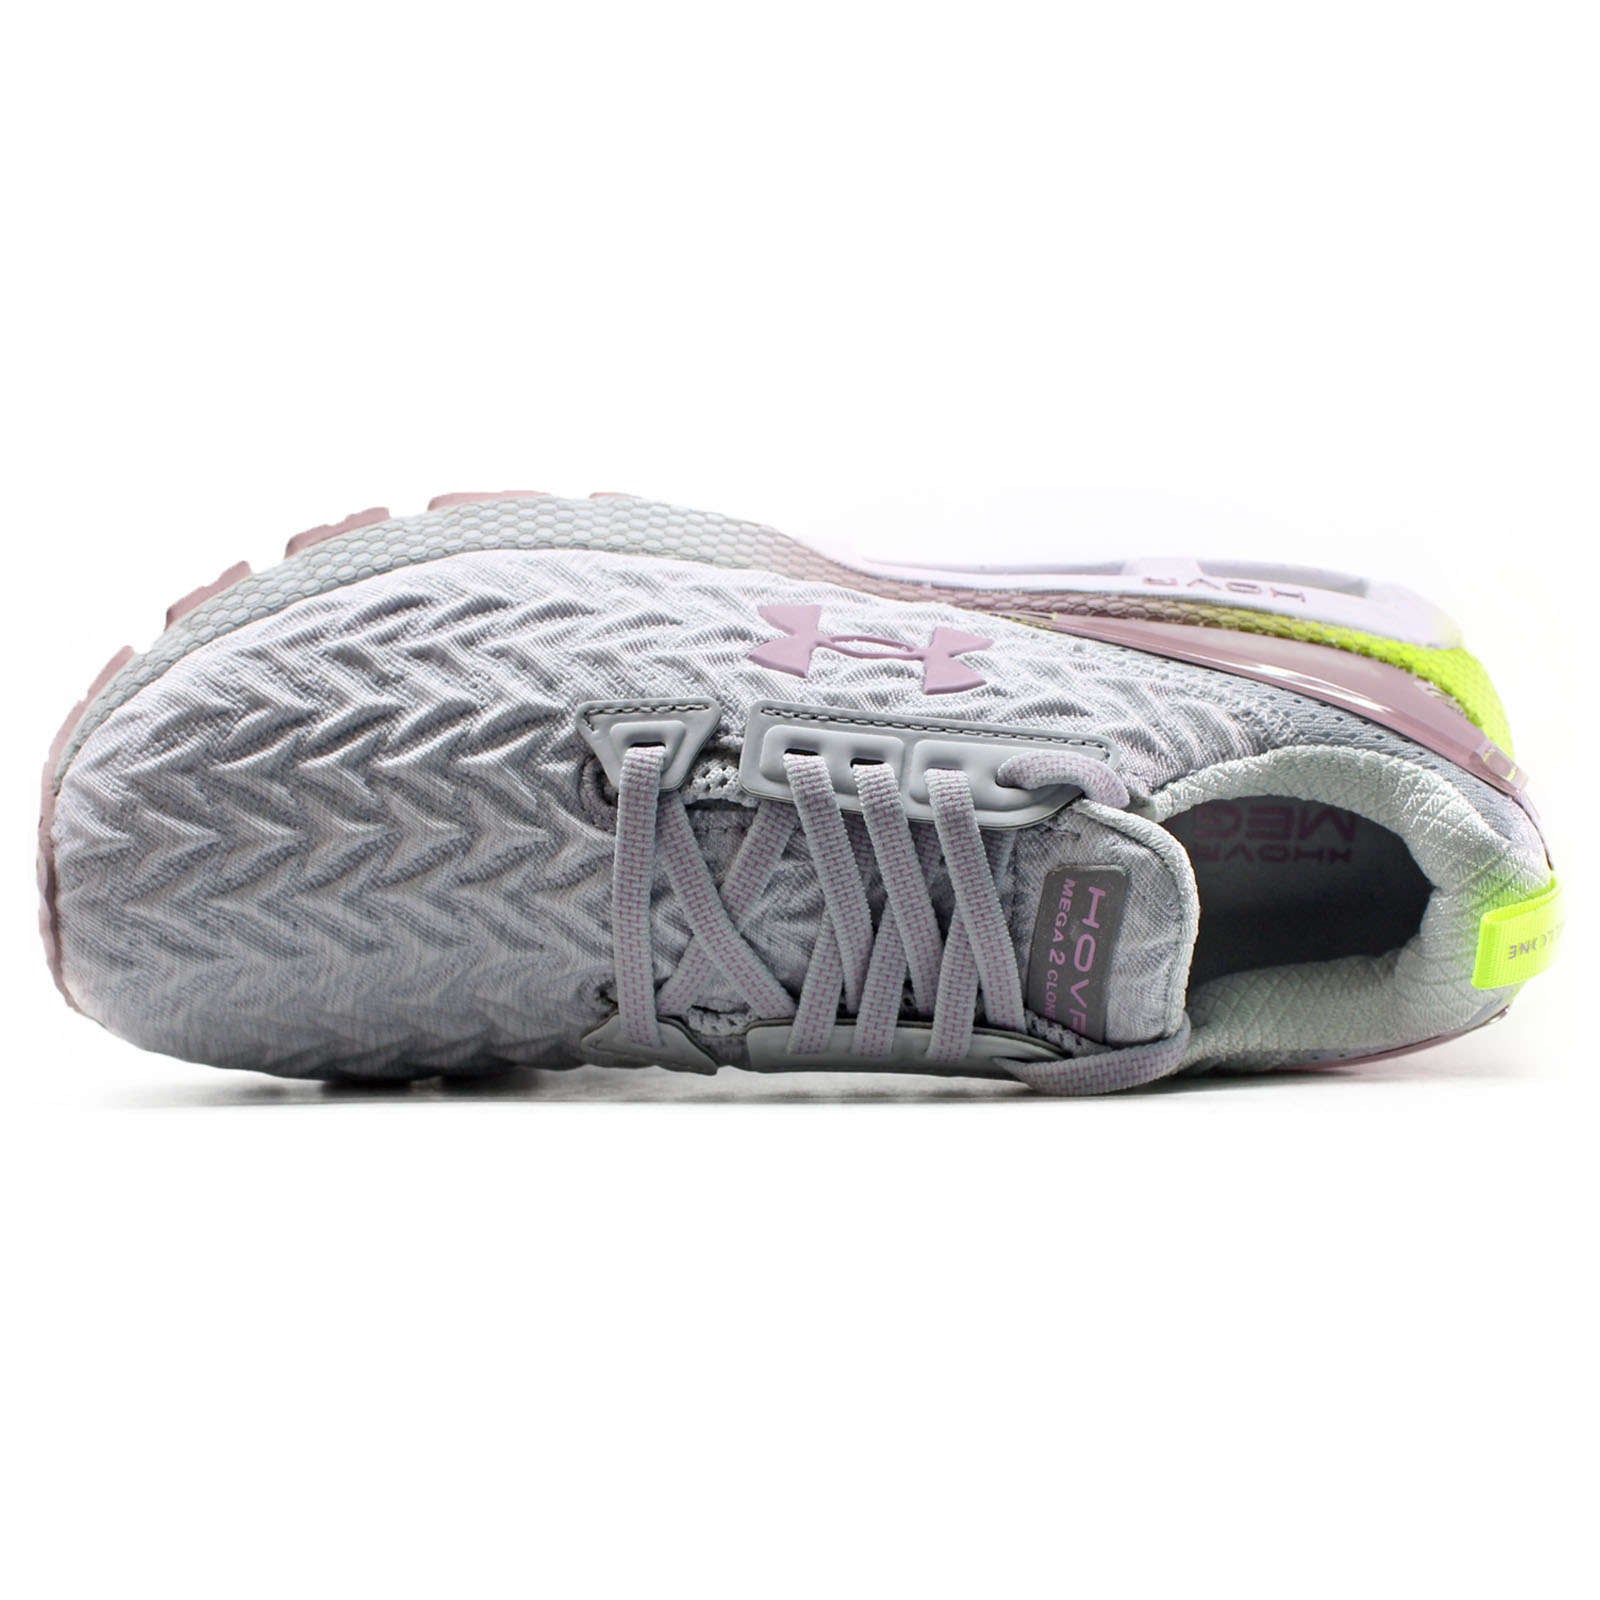 Under Armour HOVR Mega 2 Clone Synthetic Textile Women's Low-Top Trainers#color_grey pink